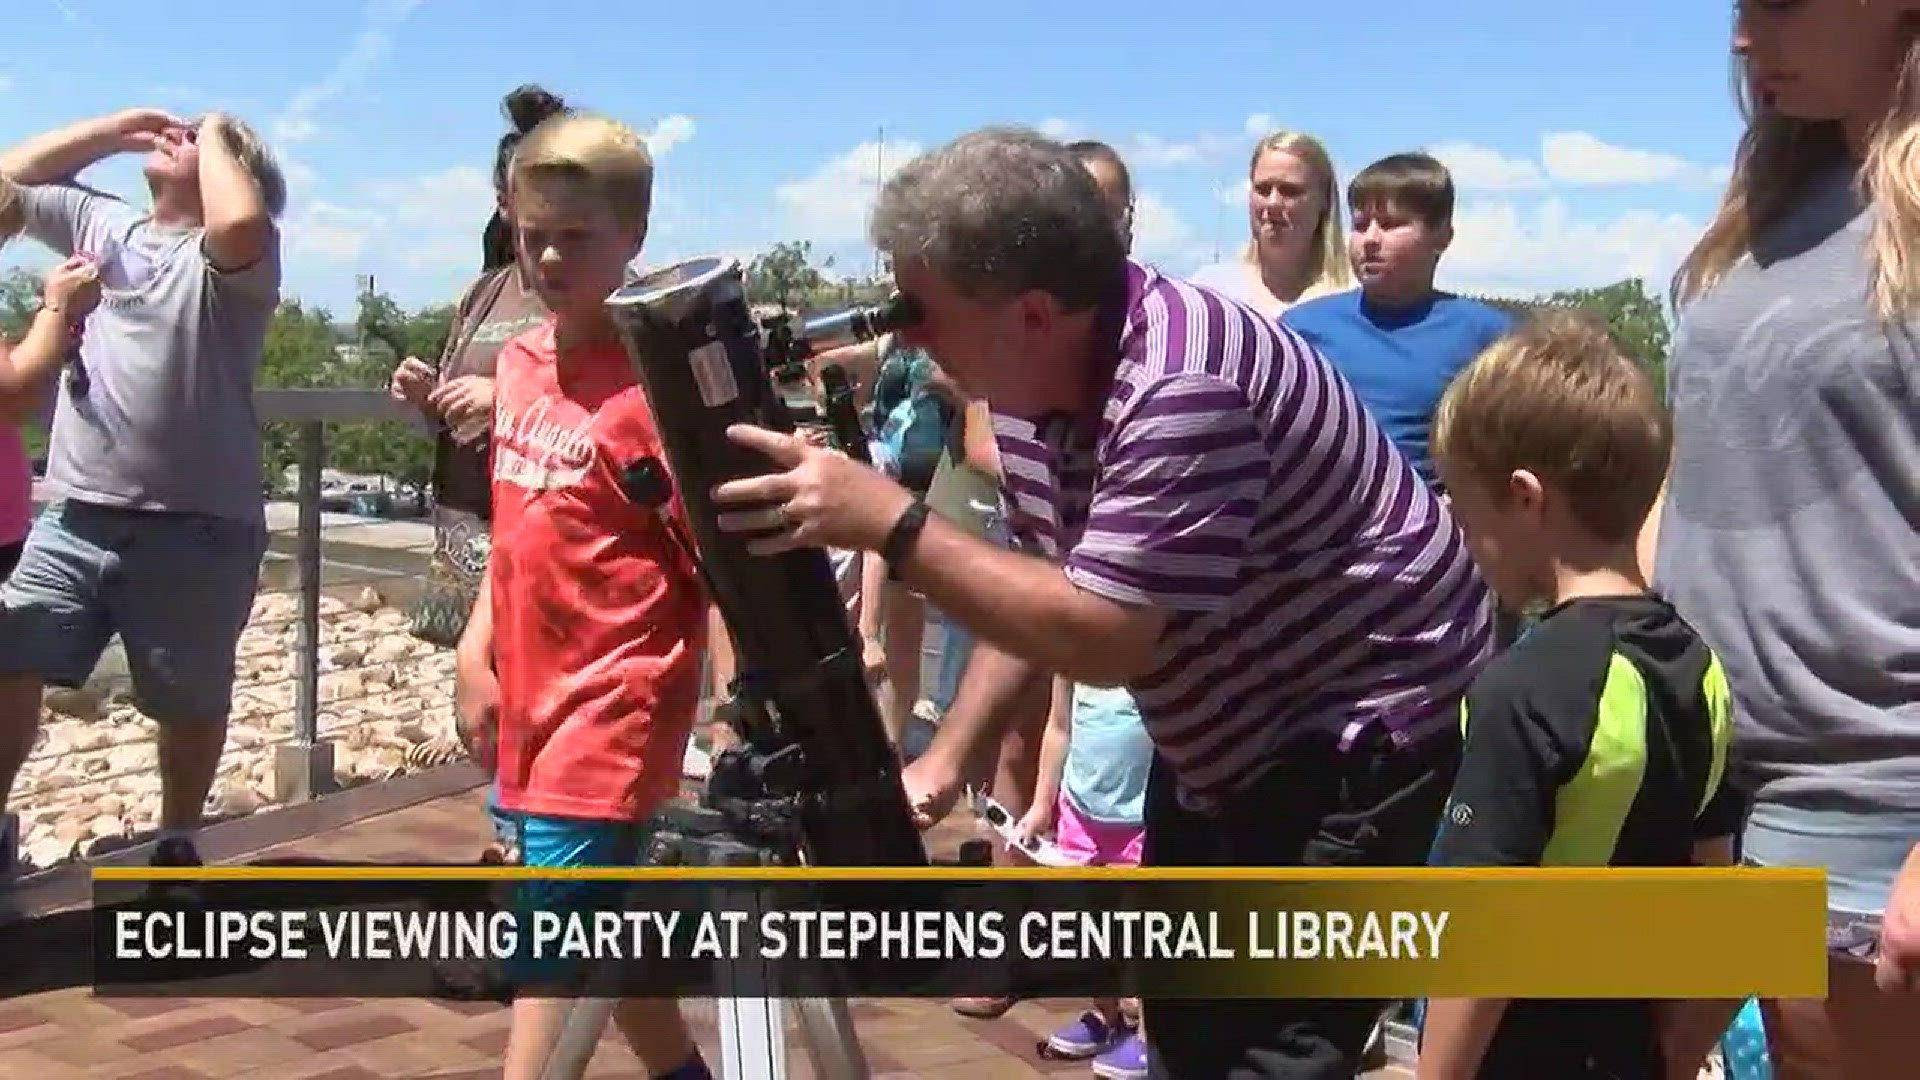 Students from all over San Angelo gathered at the Stephens Central Library to watch the solar eclipse.